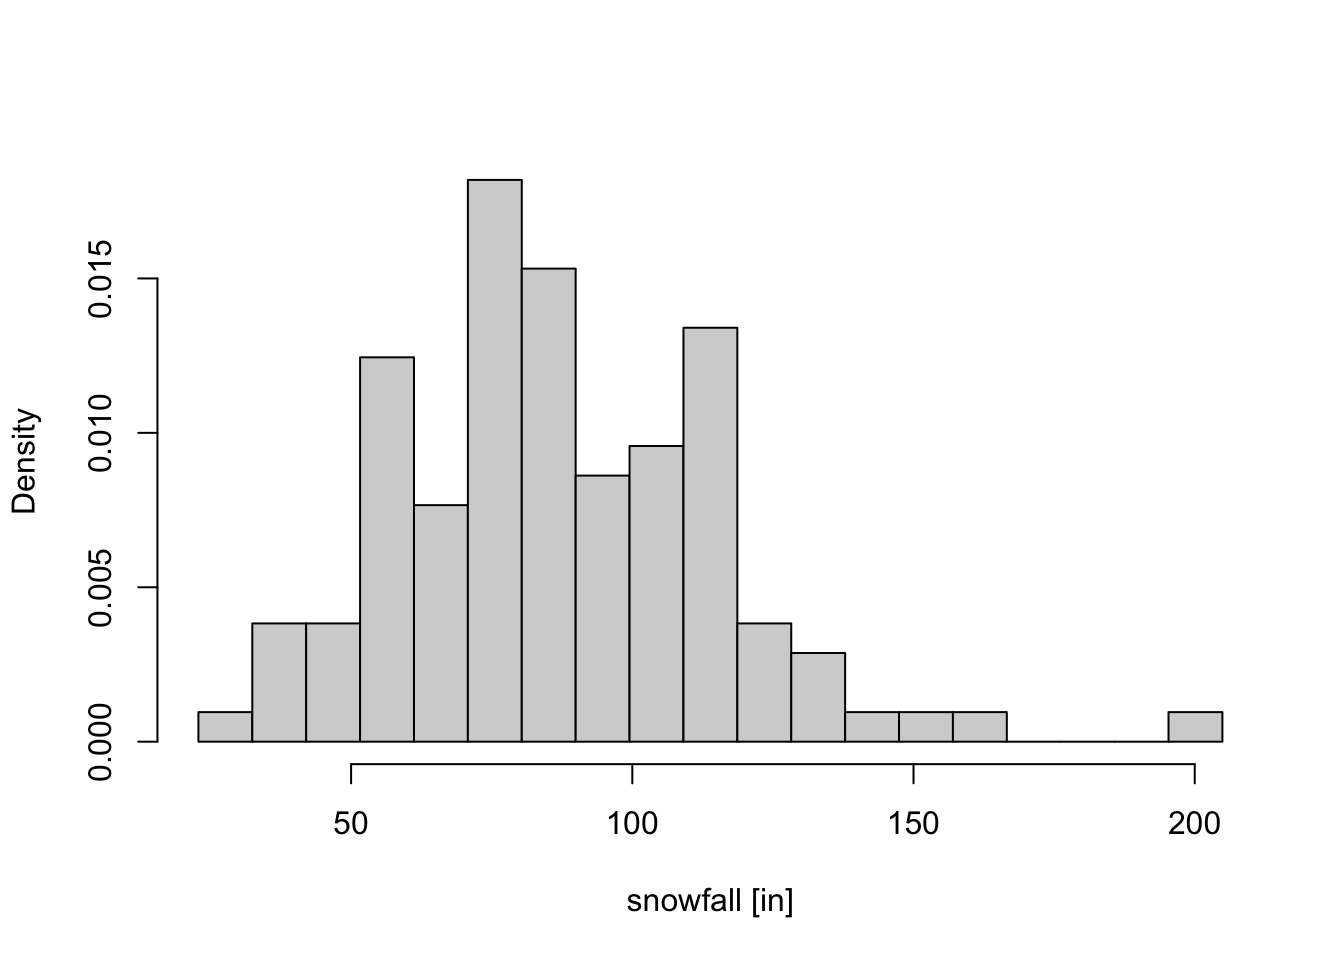 Continued from 1.4, this histogram shows the dataset in a way that three peaks are visible.